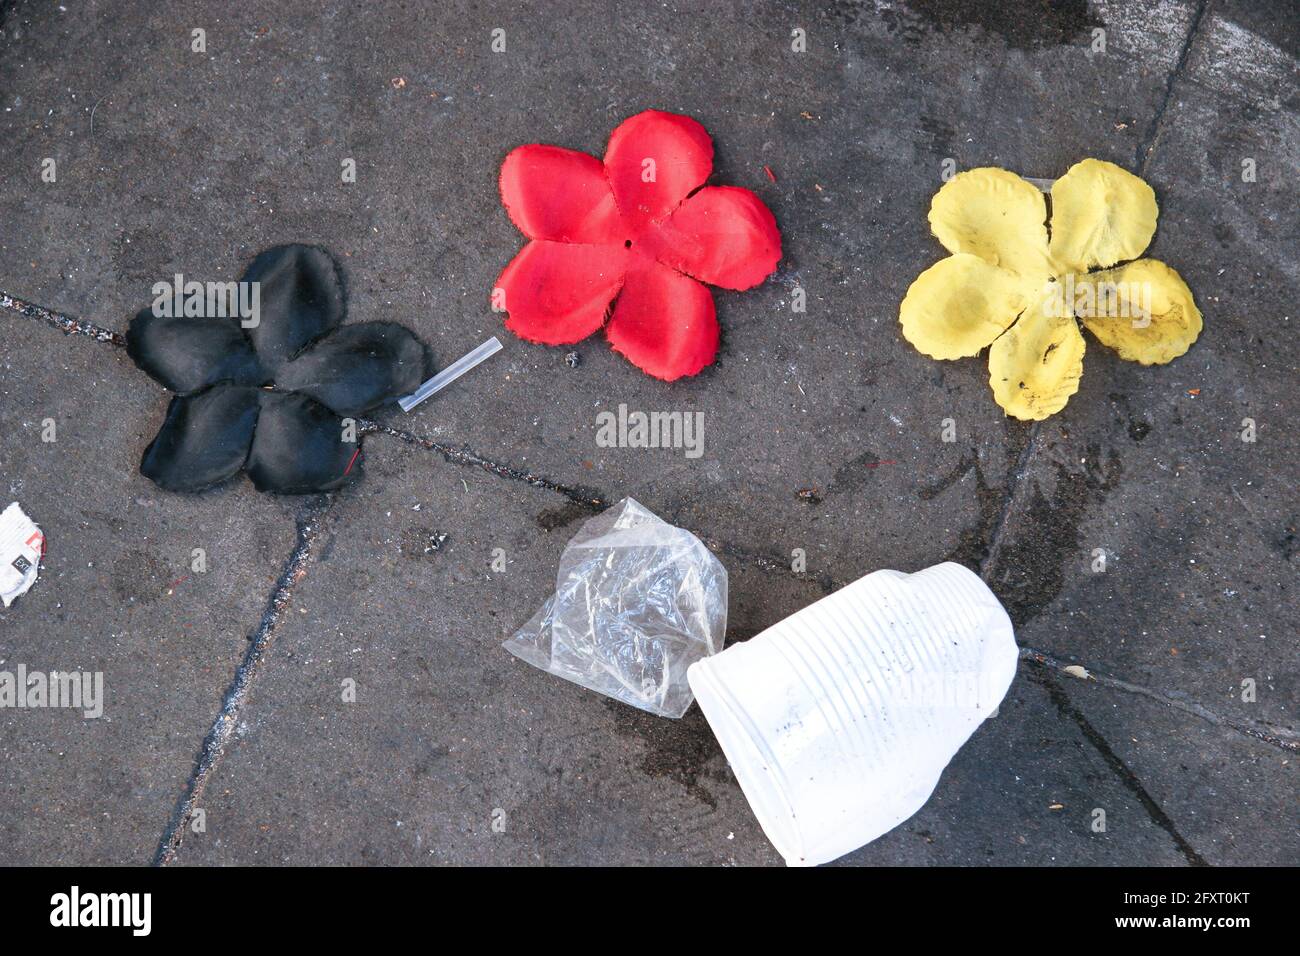 Three plastic flowers in black, red and gold lie on the floor between plastic pans Stock Photo